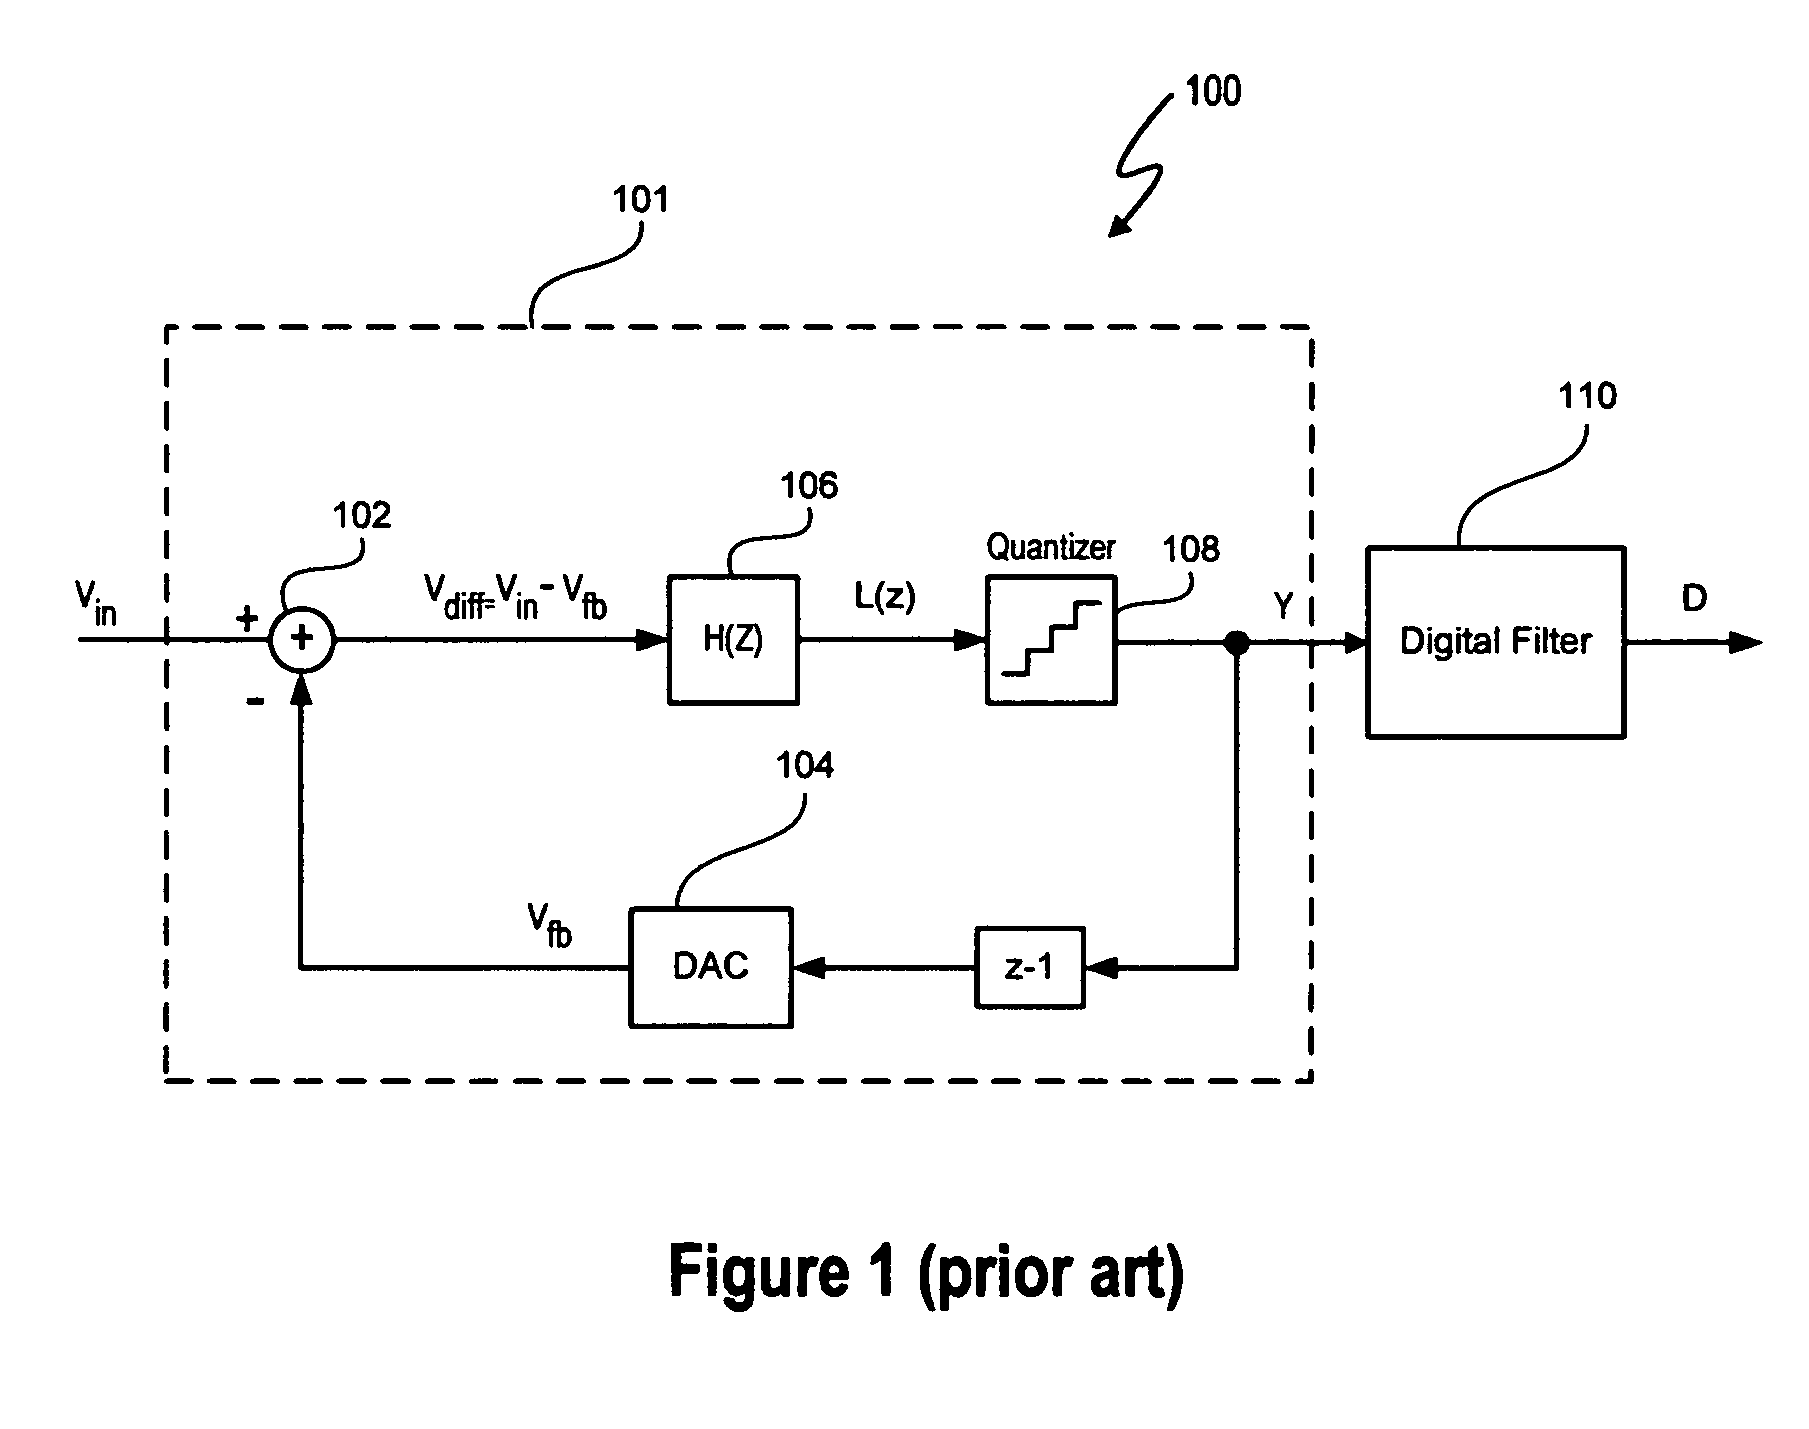 Signal processing system with analog-to-digital converter using delta-sigma modulation having an internal stabilizer loop